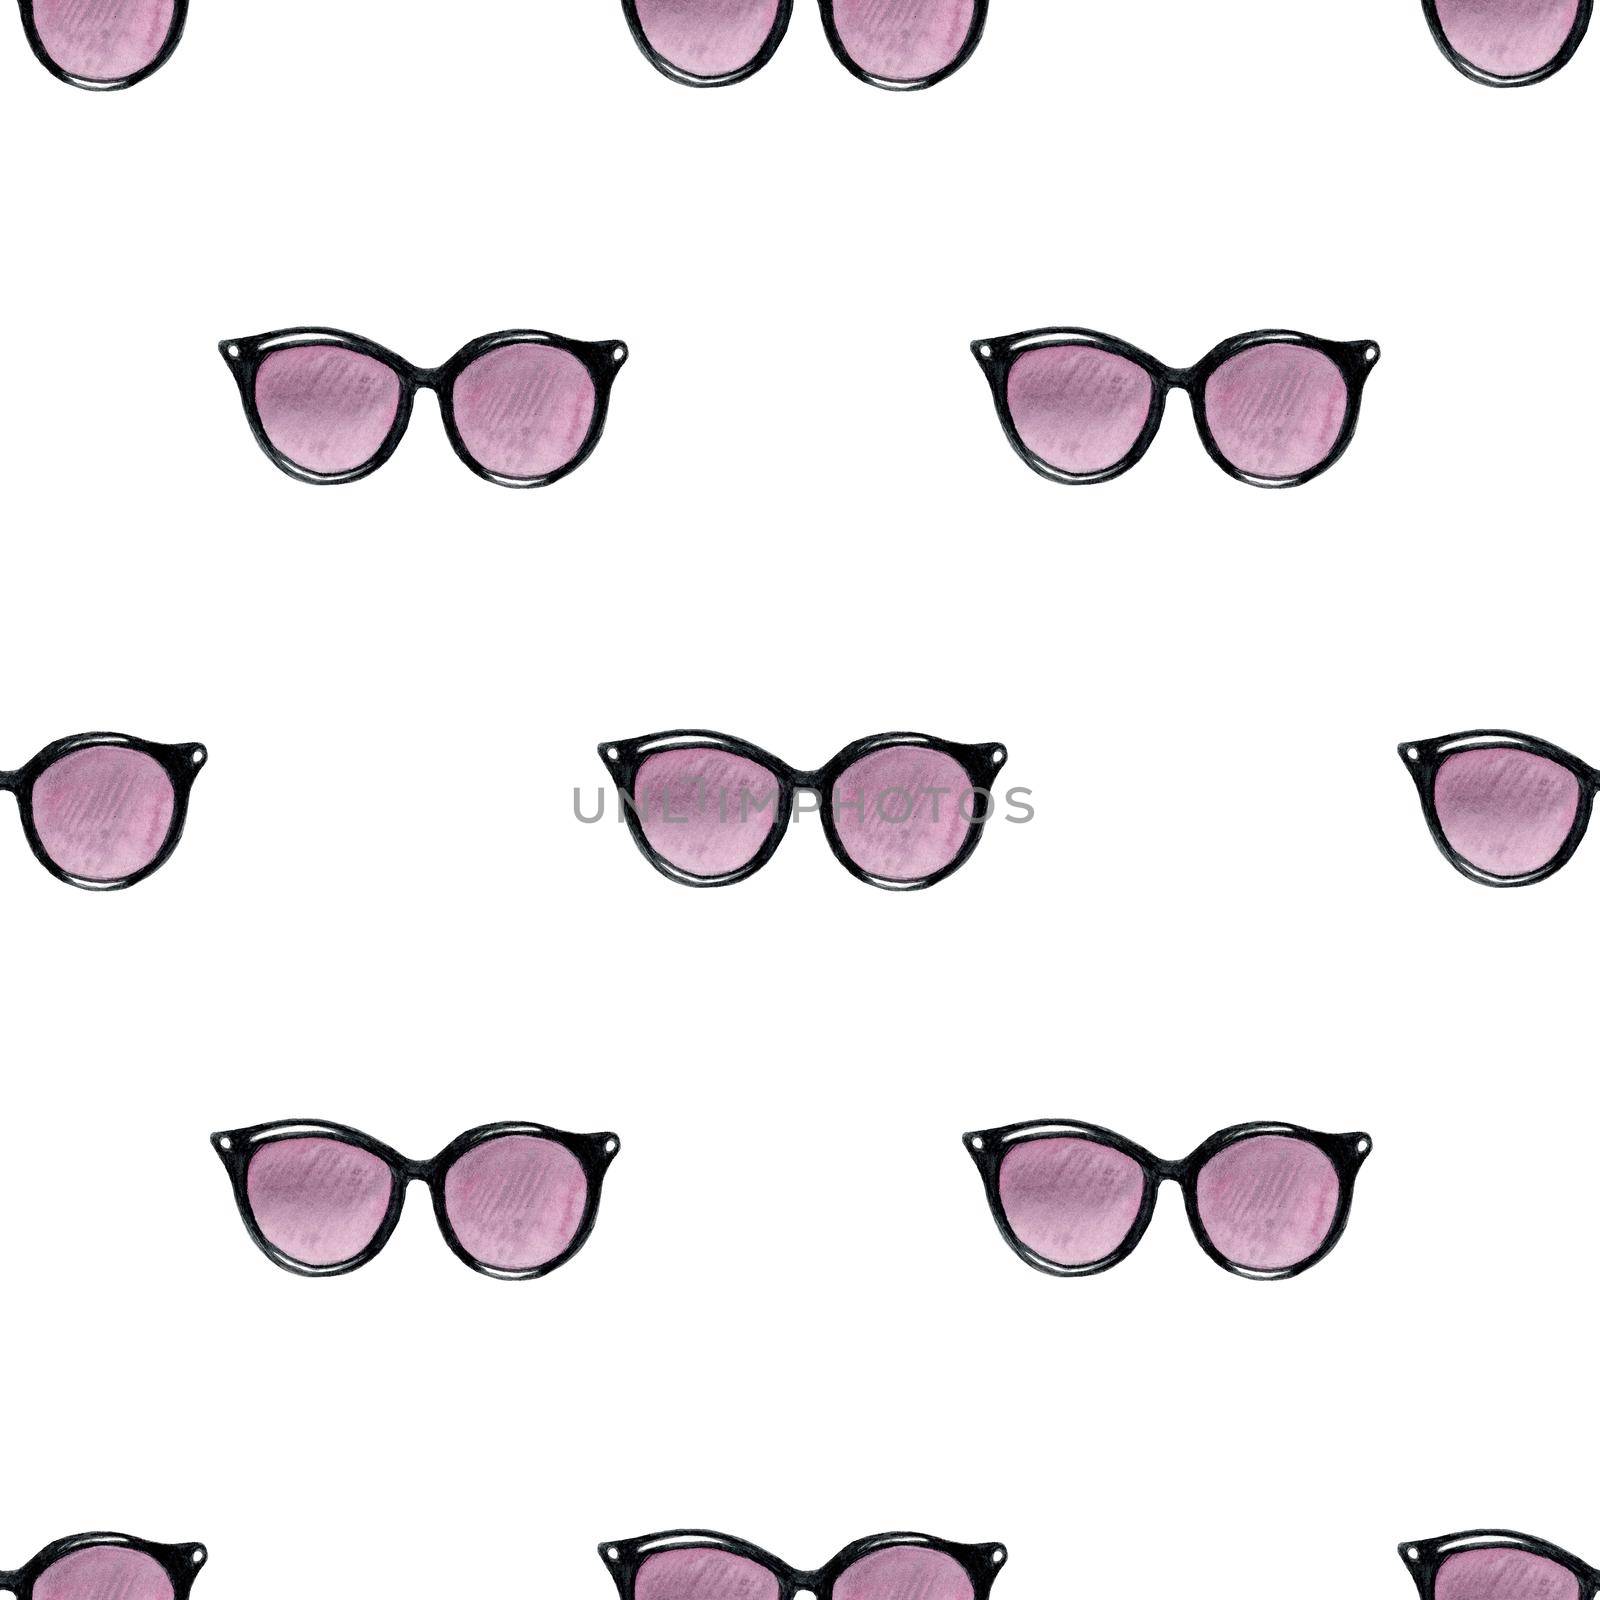 watercolor purple sunglasses fashion seamless pattern on white background for fabric, textile, scrapbooking, wrapping paper,invitations